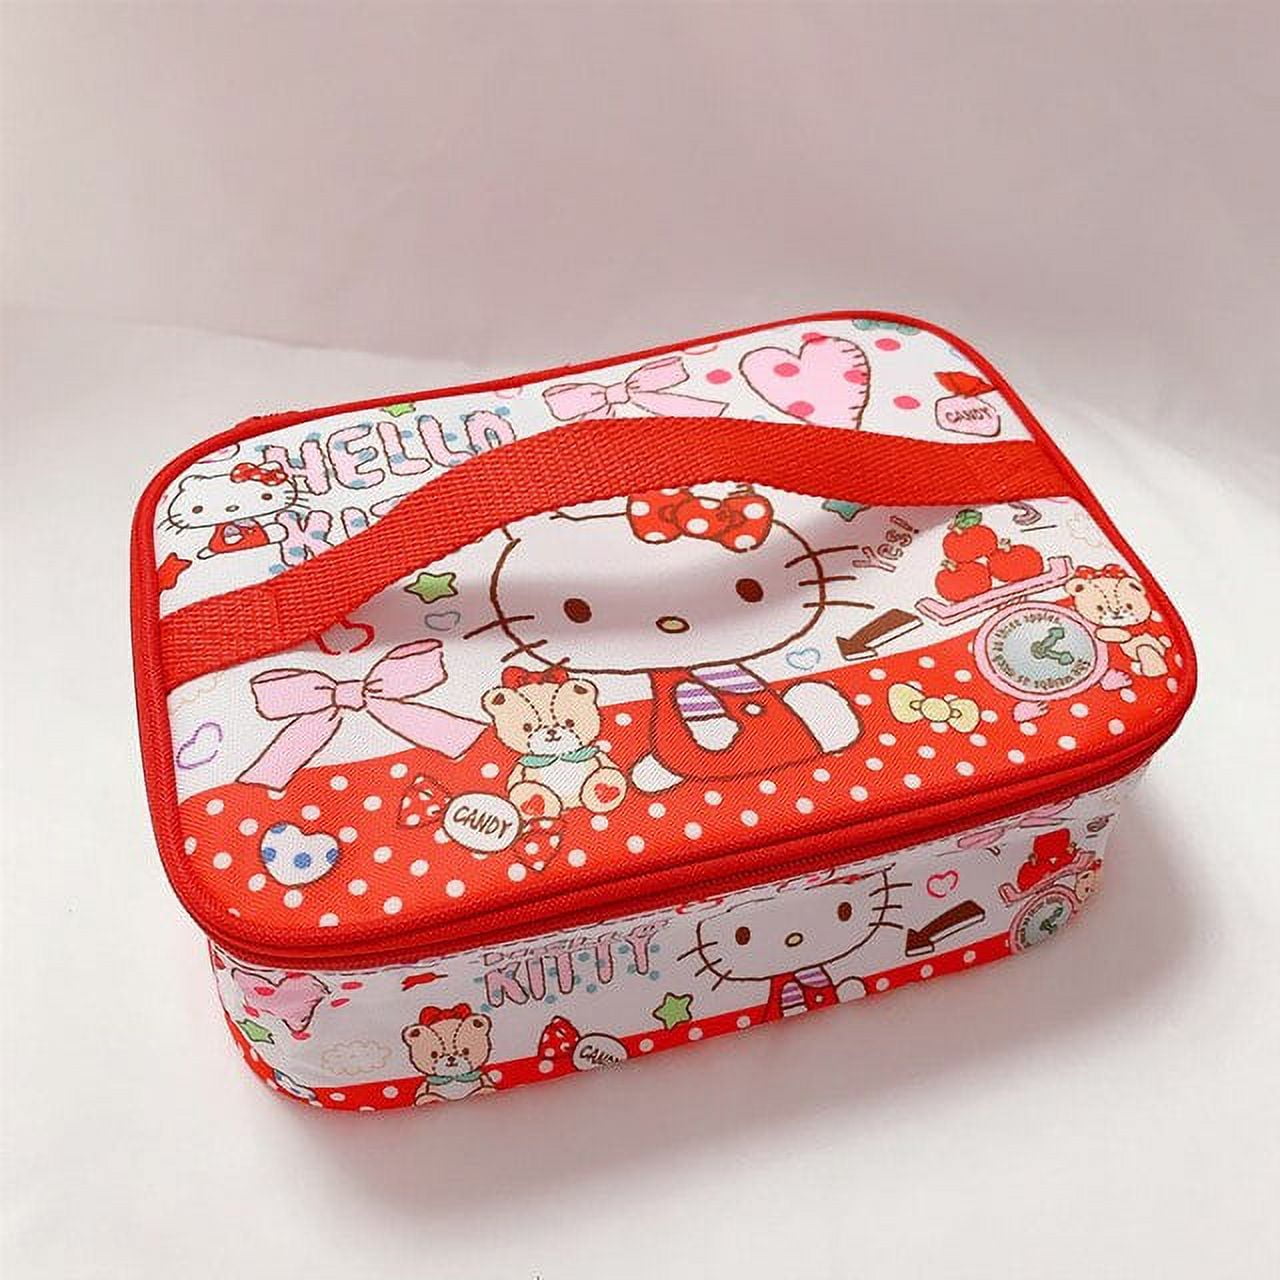 Sanrio's New Cartoon Japanese Lunch Box Student Lunch Box Bag My Melody Girl  Cute Hello Kitty Large Size Hand Lunch Box Bag Gift - Animation  Derivatives/peripheral Products - AliExpress